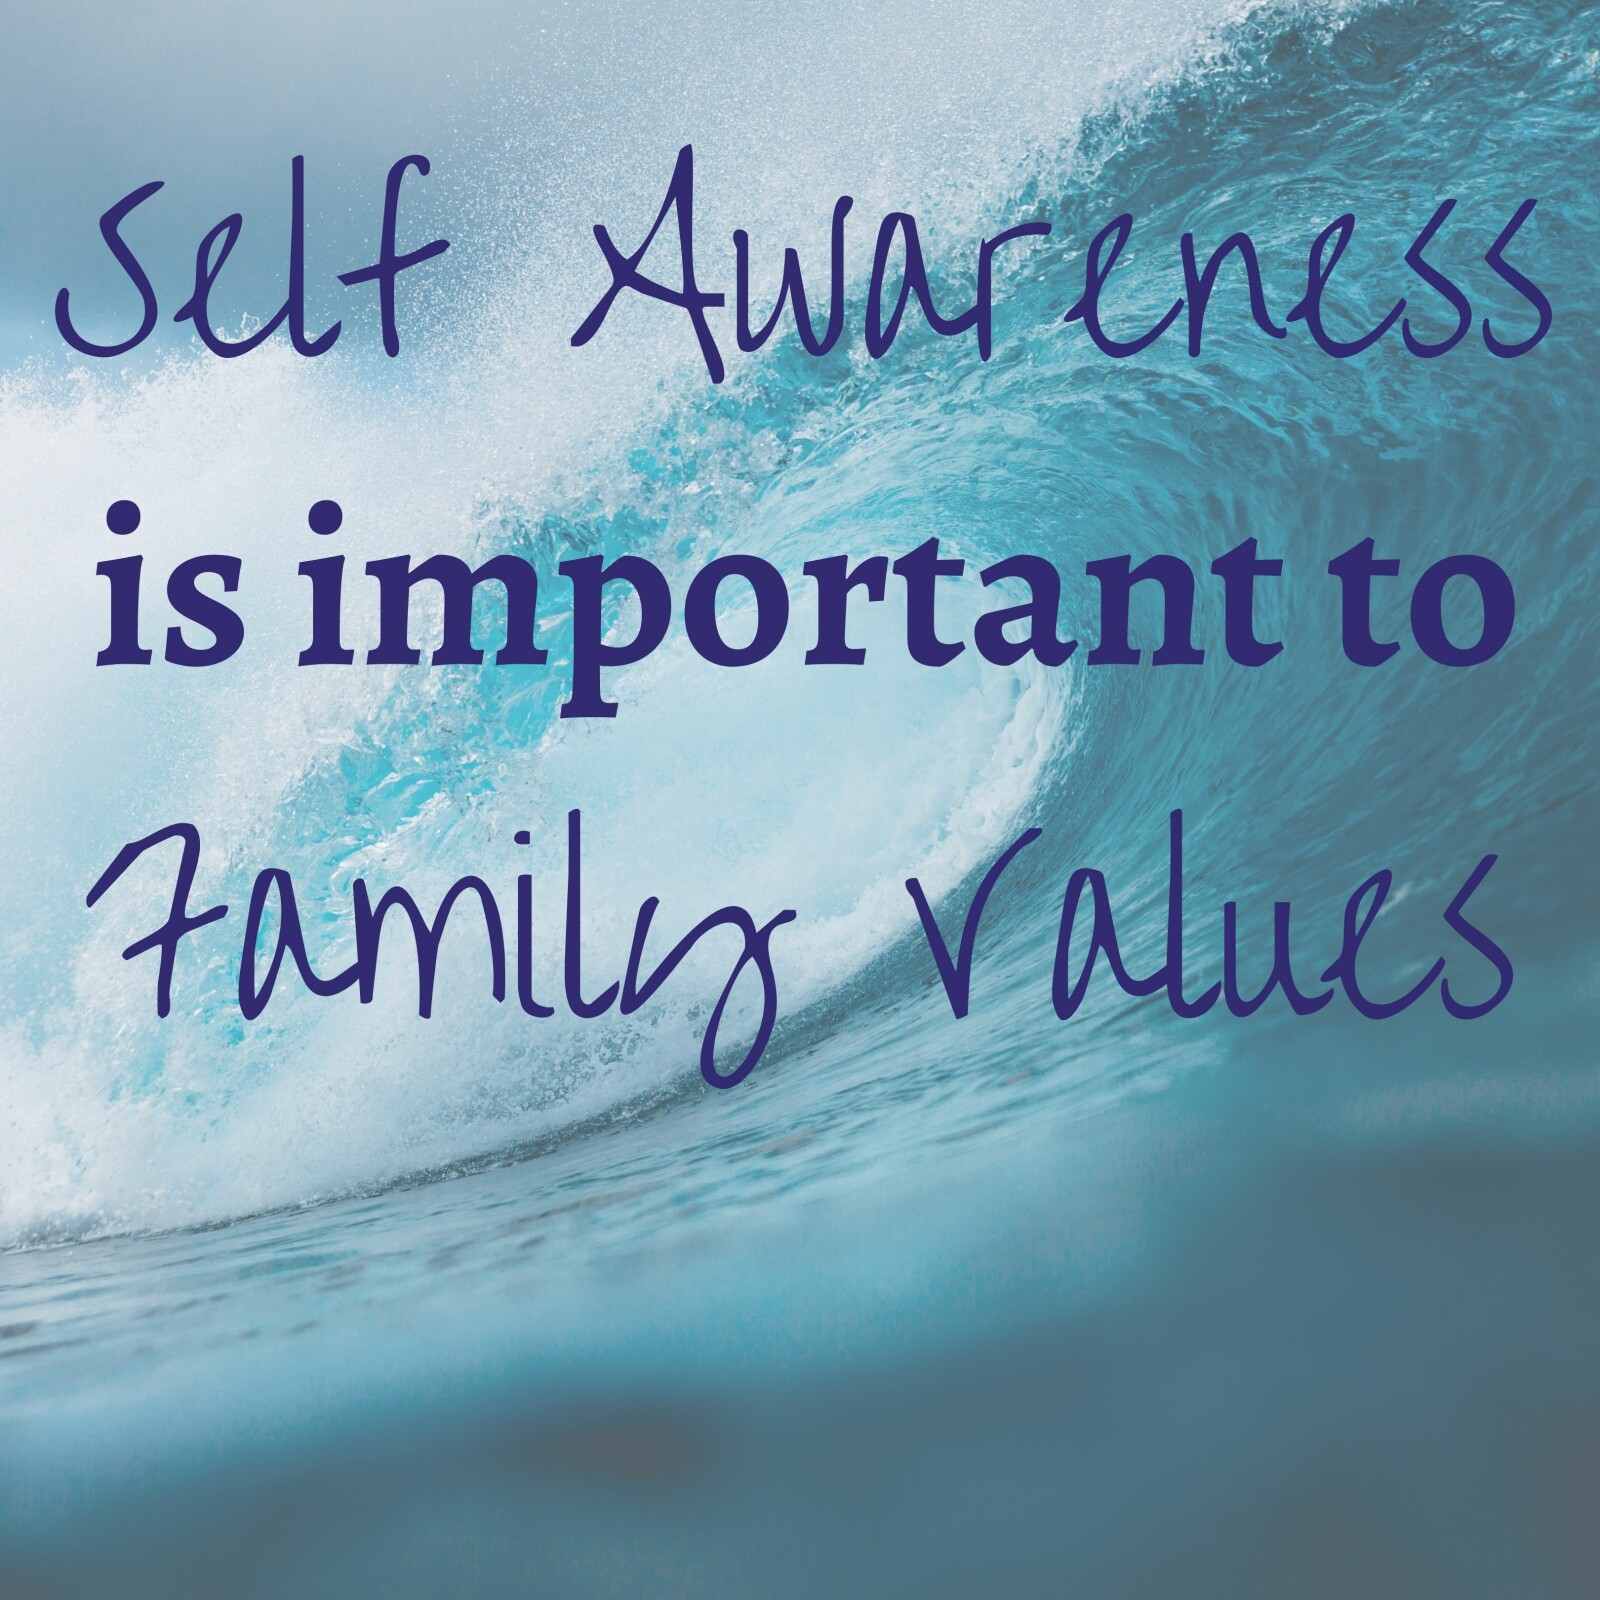 How Self Awareness is important to Family Values